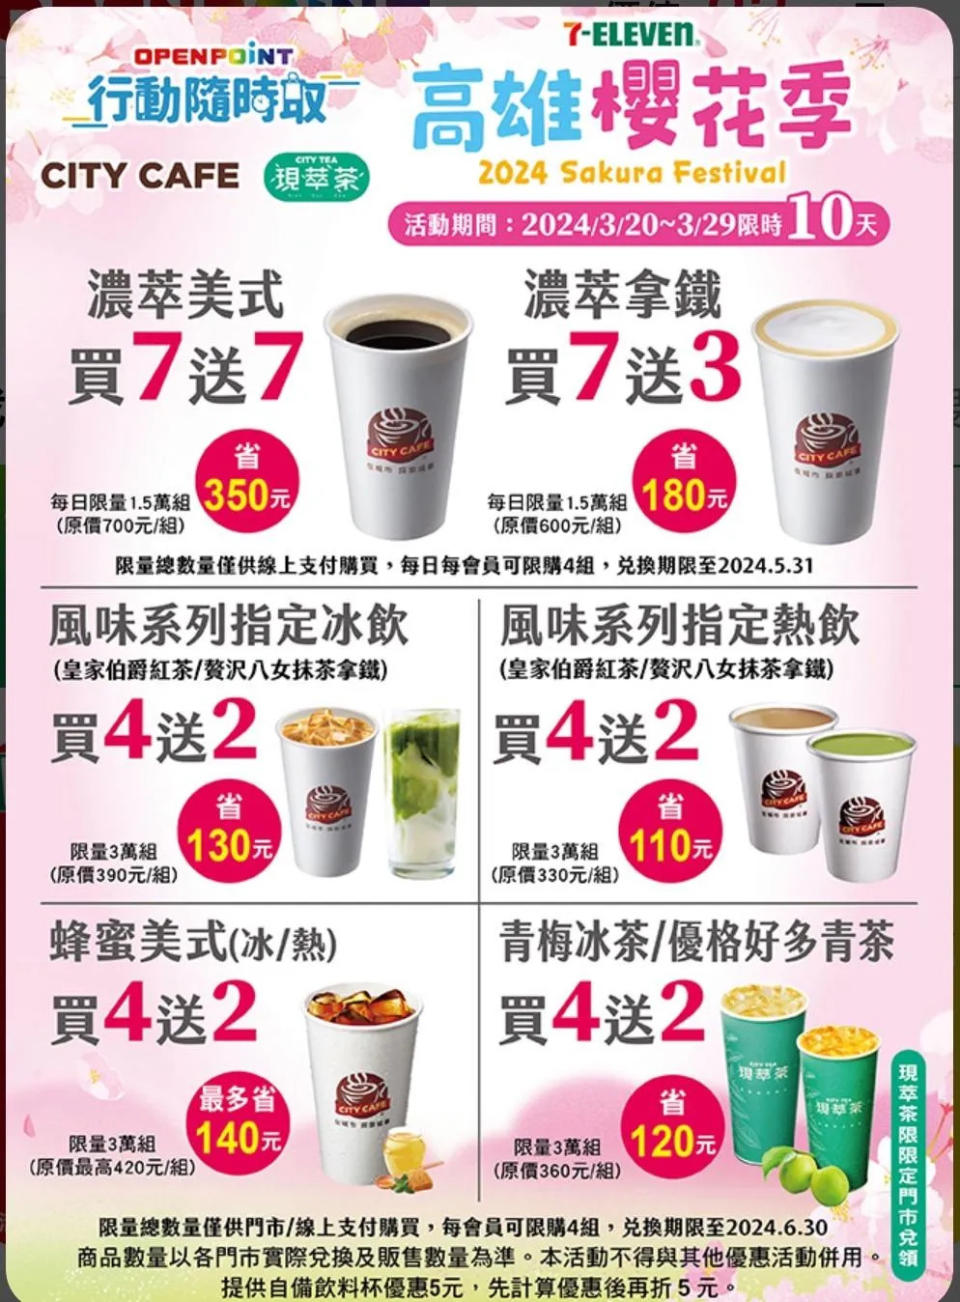 <strong>7-ELEVEN高雄櫻花季期間，祭多項咖啡飲品優惠。（圖／7-ELEVEN）</strong>